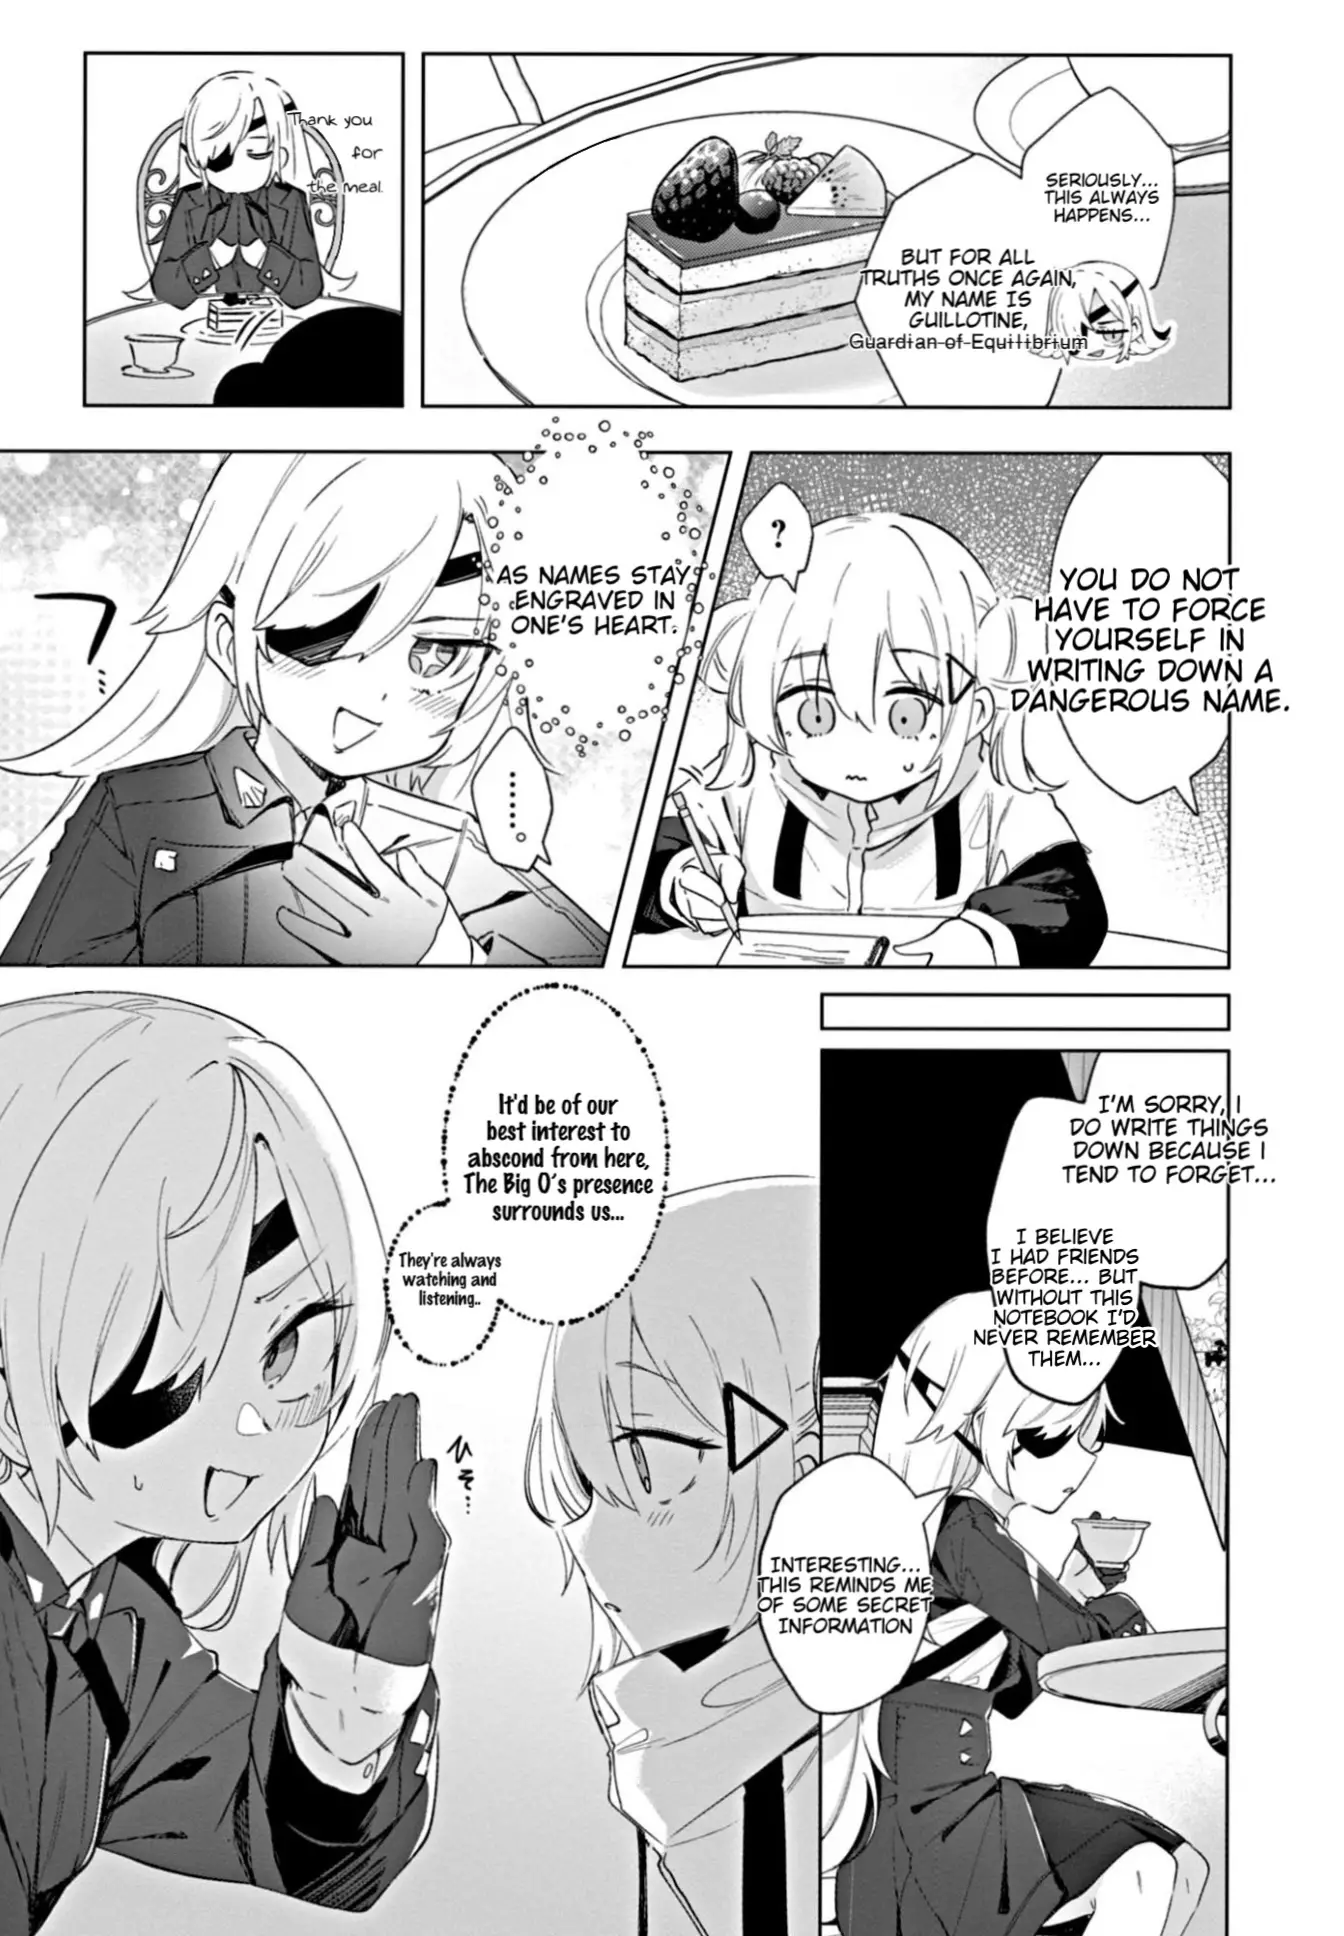 Goddess Of Victory: Nikke - Sweet Encount - 7 page 7-06f116b8